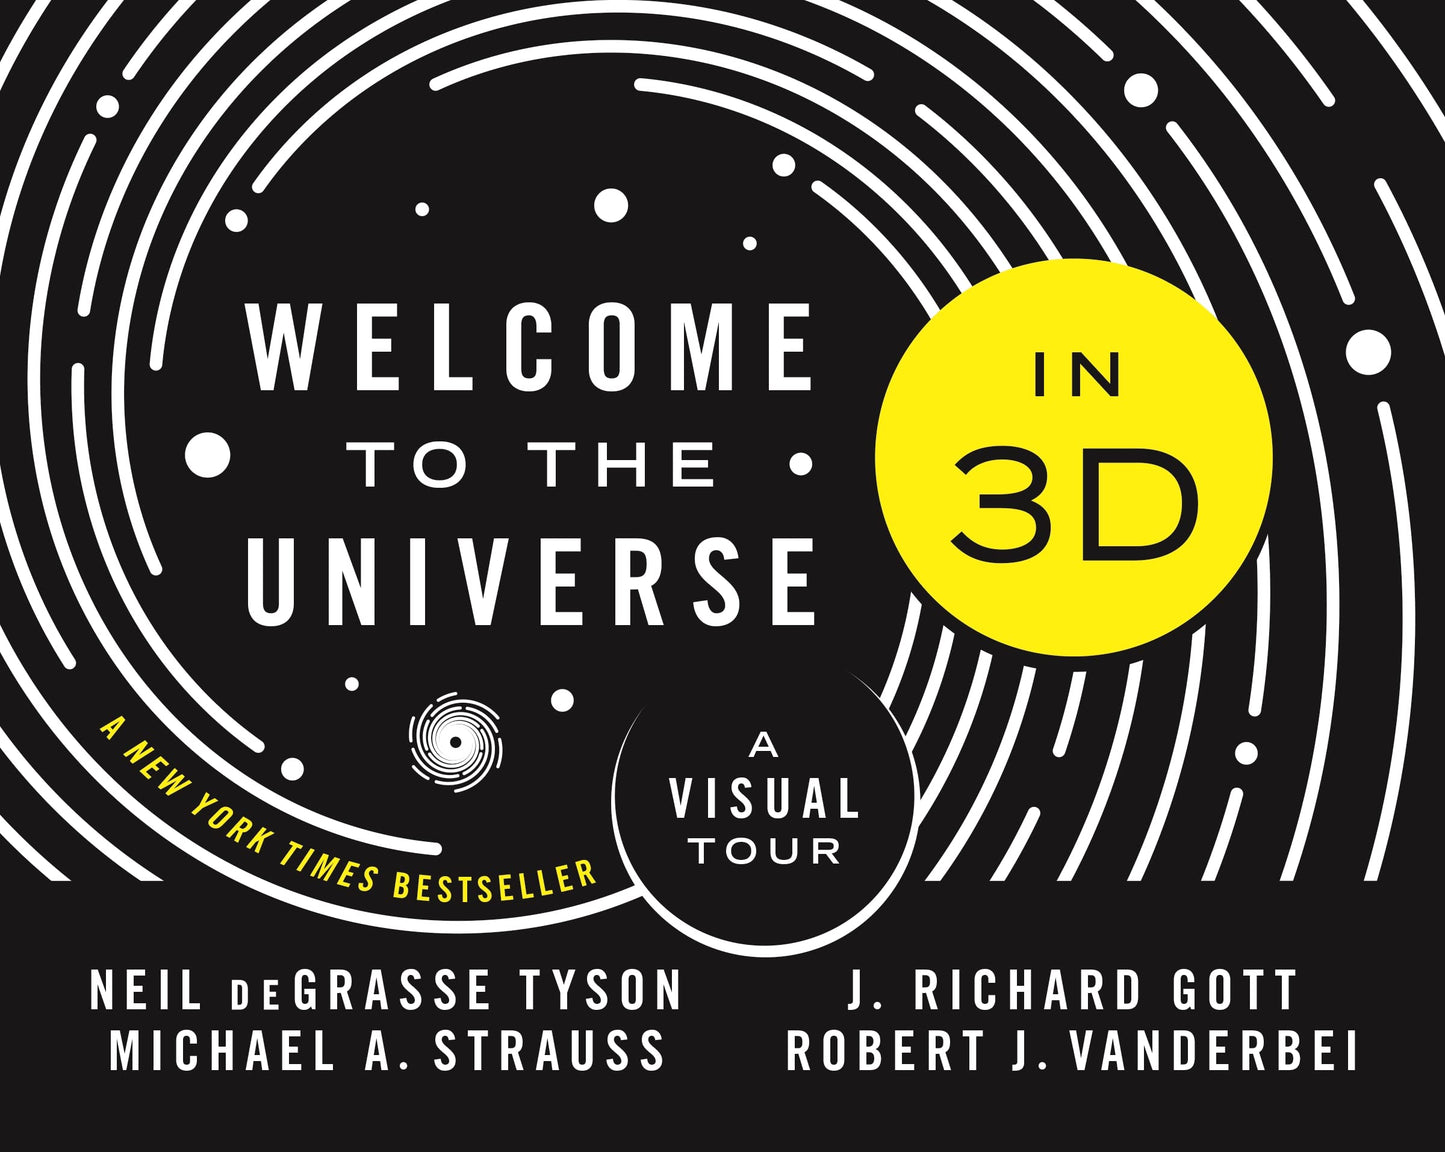 Welcome to the Universe in 3D // A Visual Tour